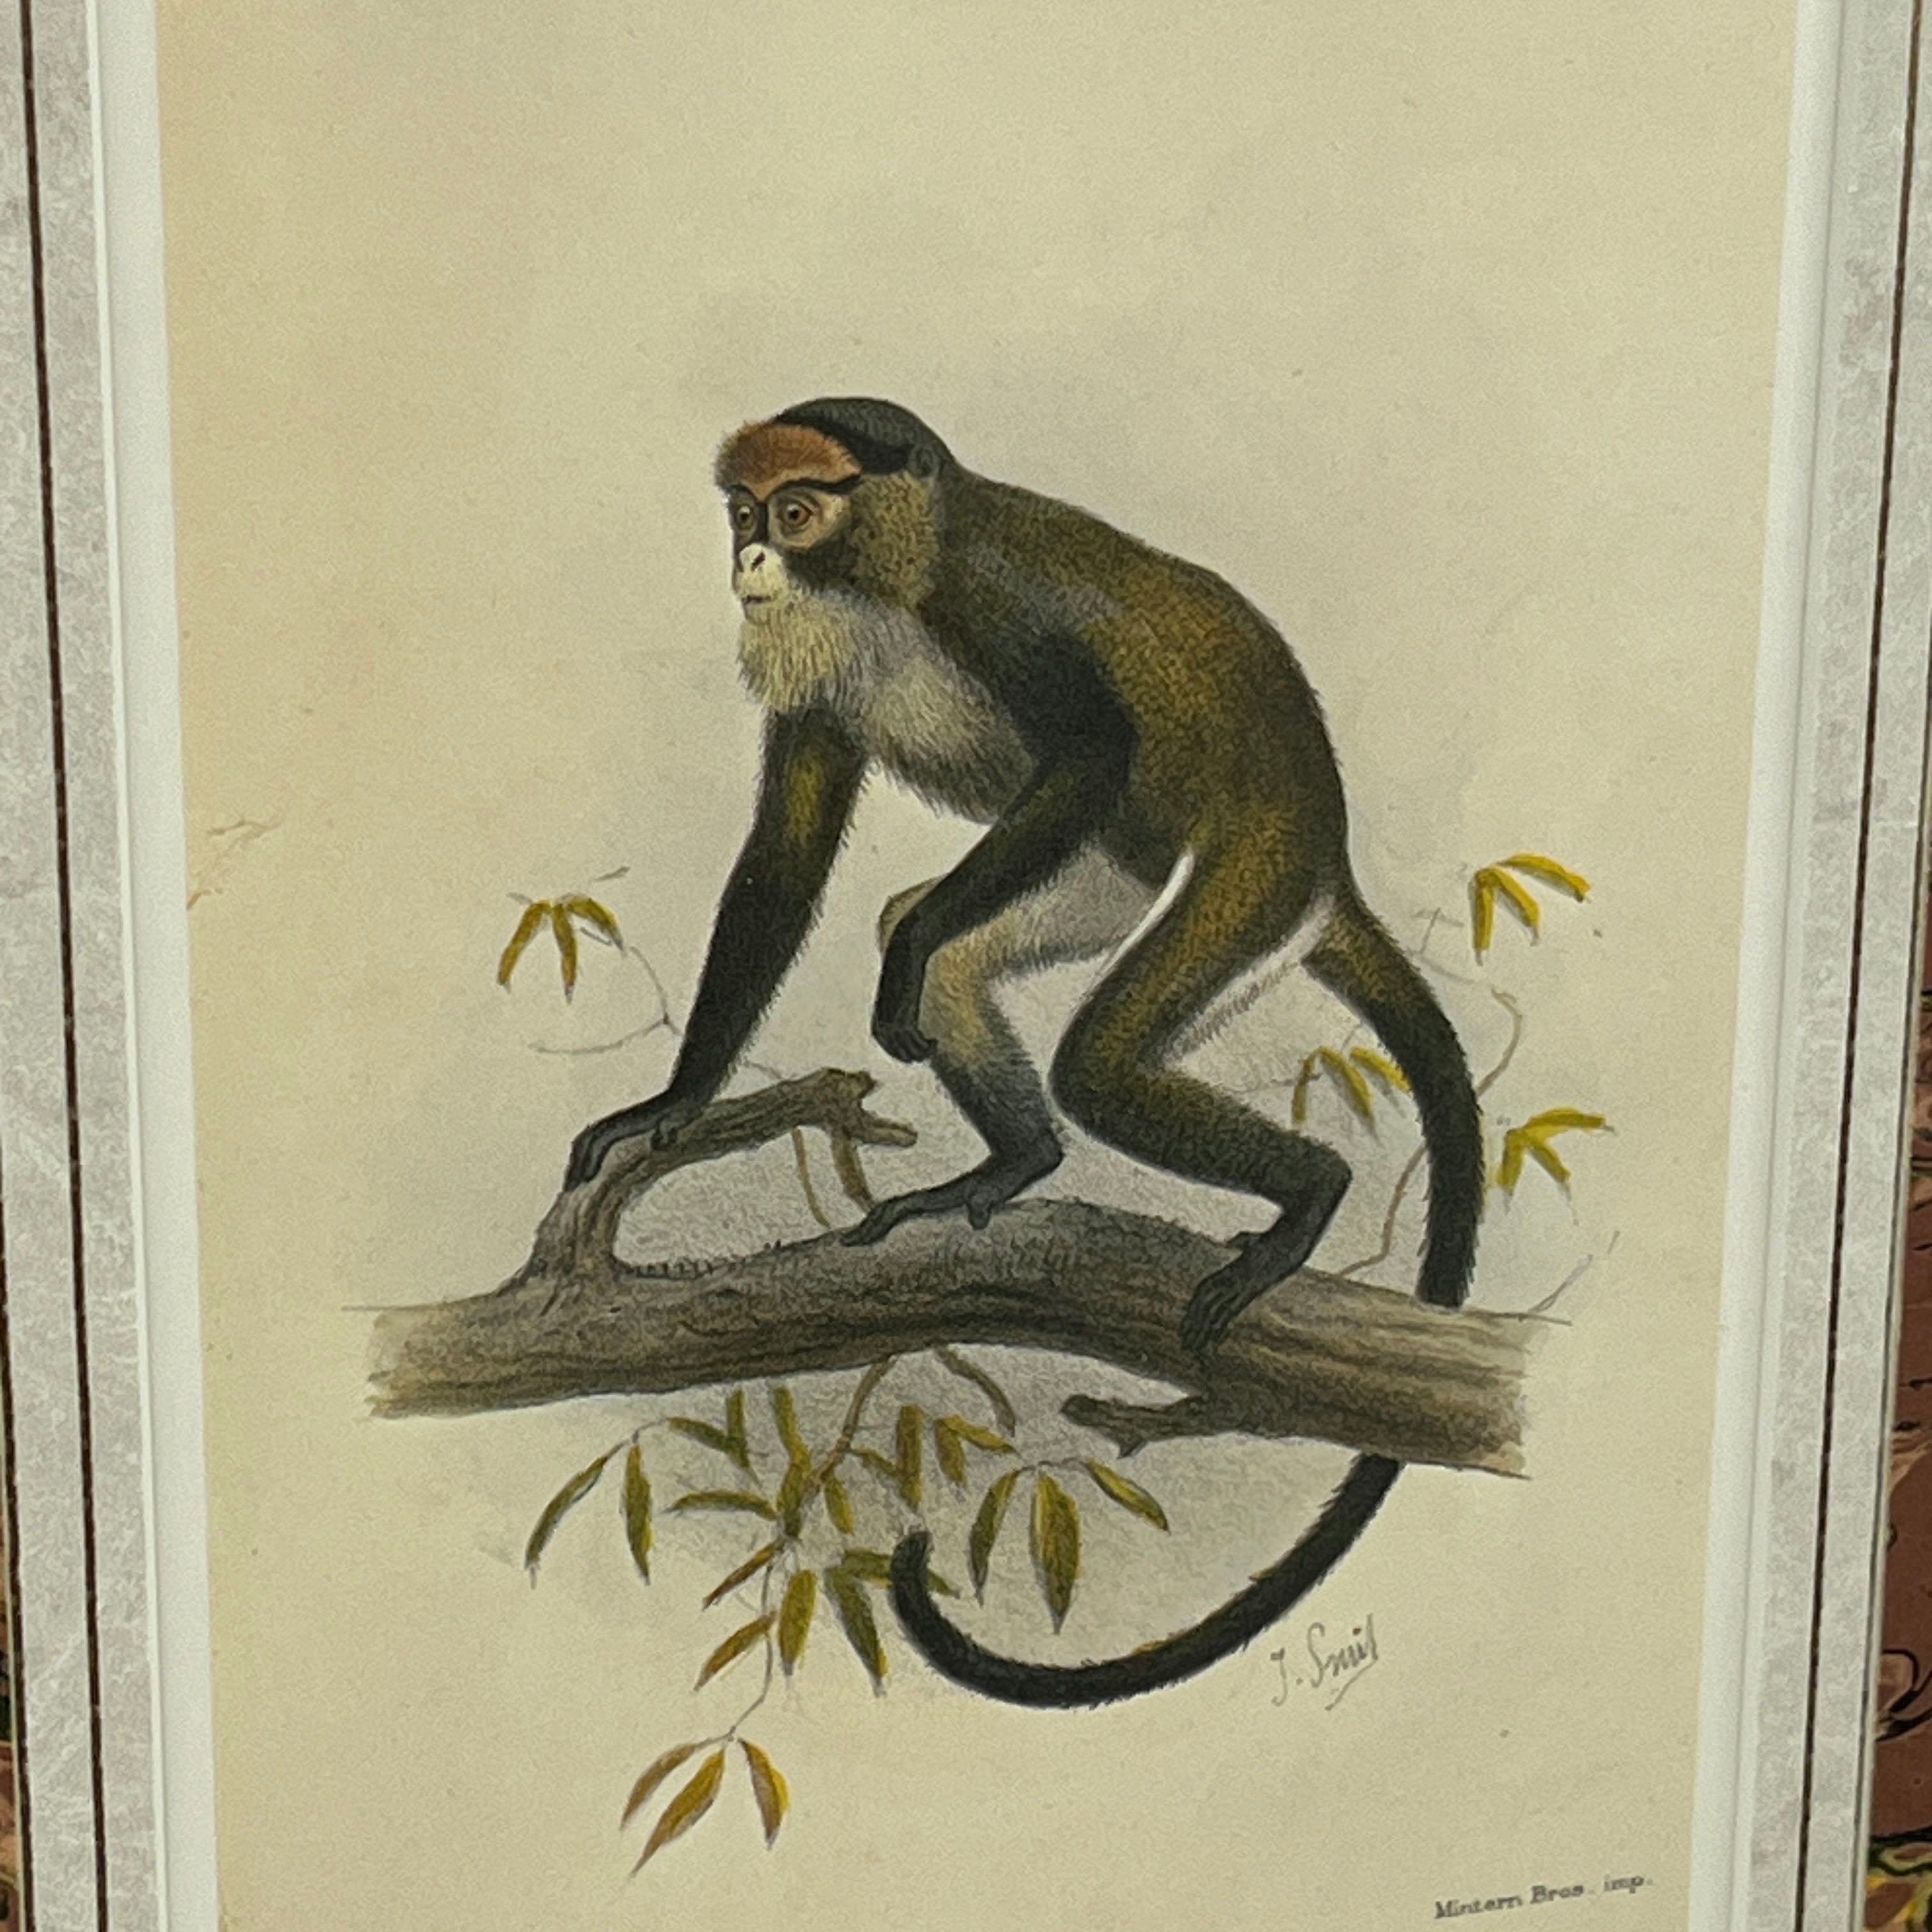 Cercopithecus Brazzae by J. Smith Marbled Golden Matte Print